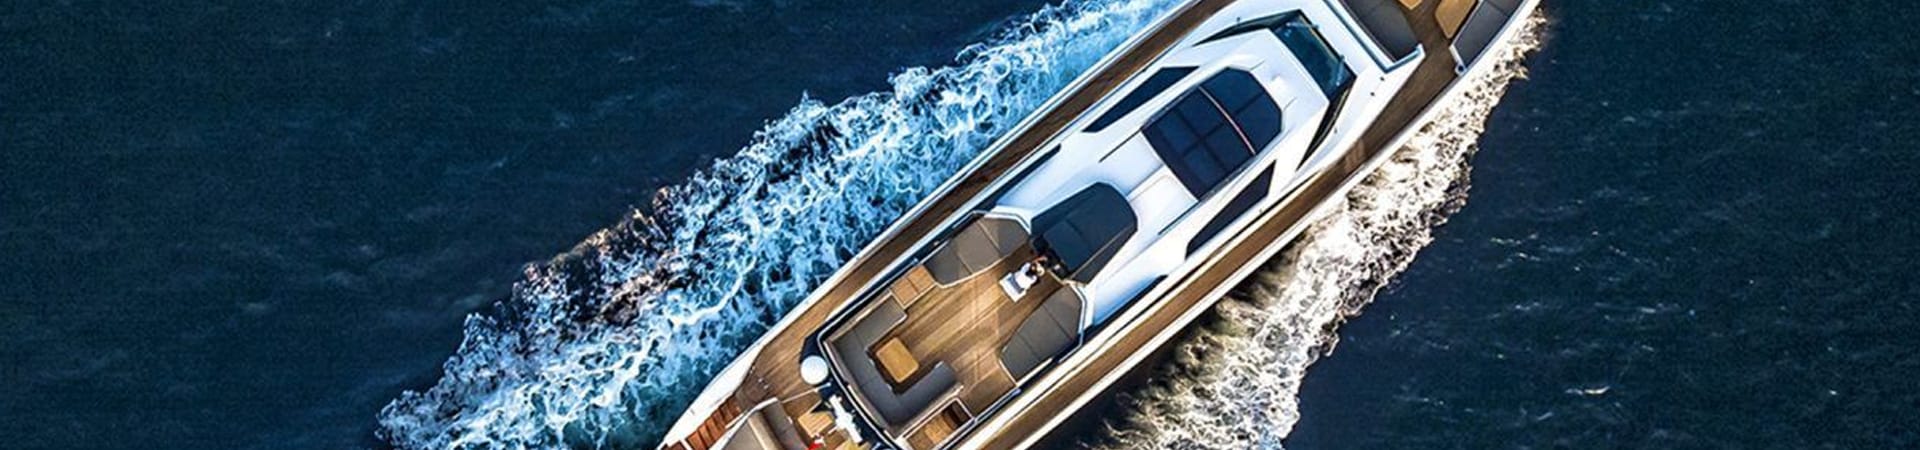 Top Ultra-Luxurious Yachts For Rent in Dubai